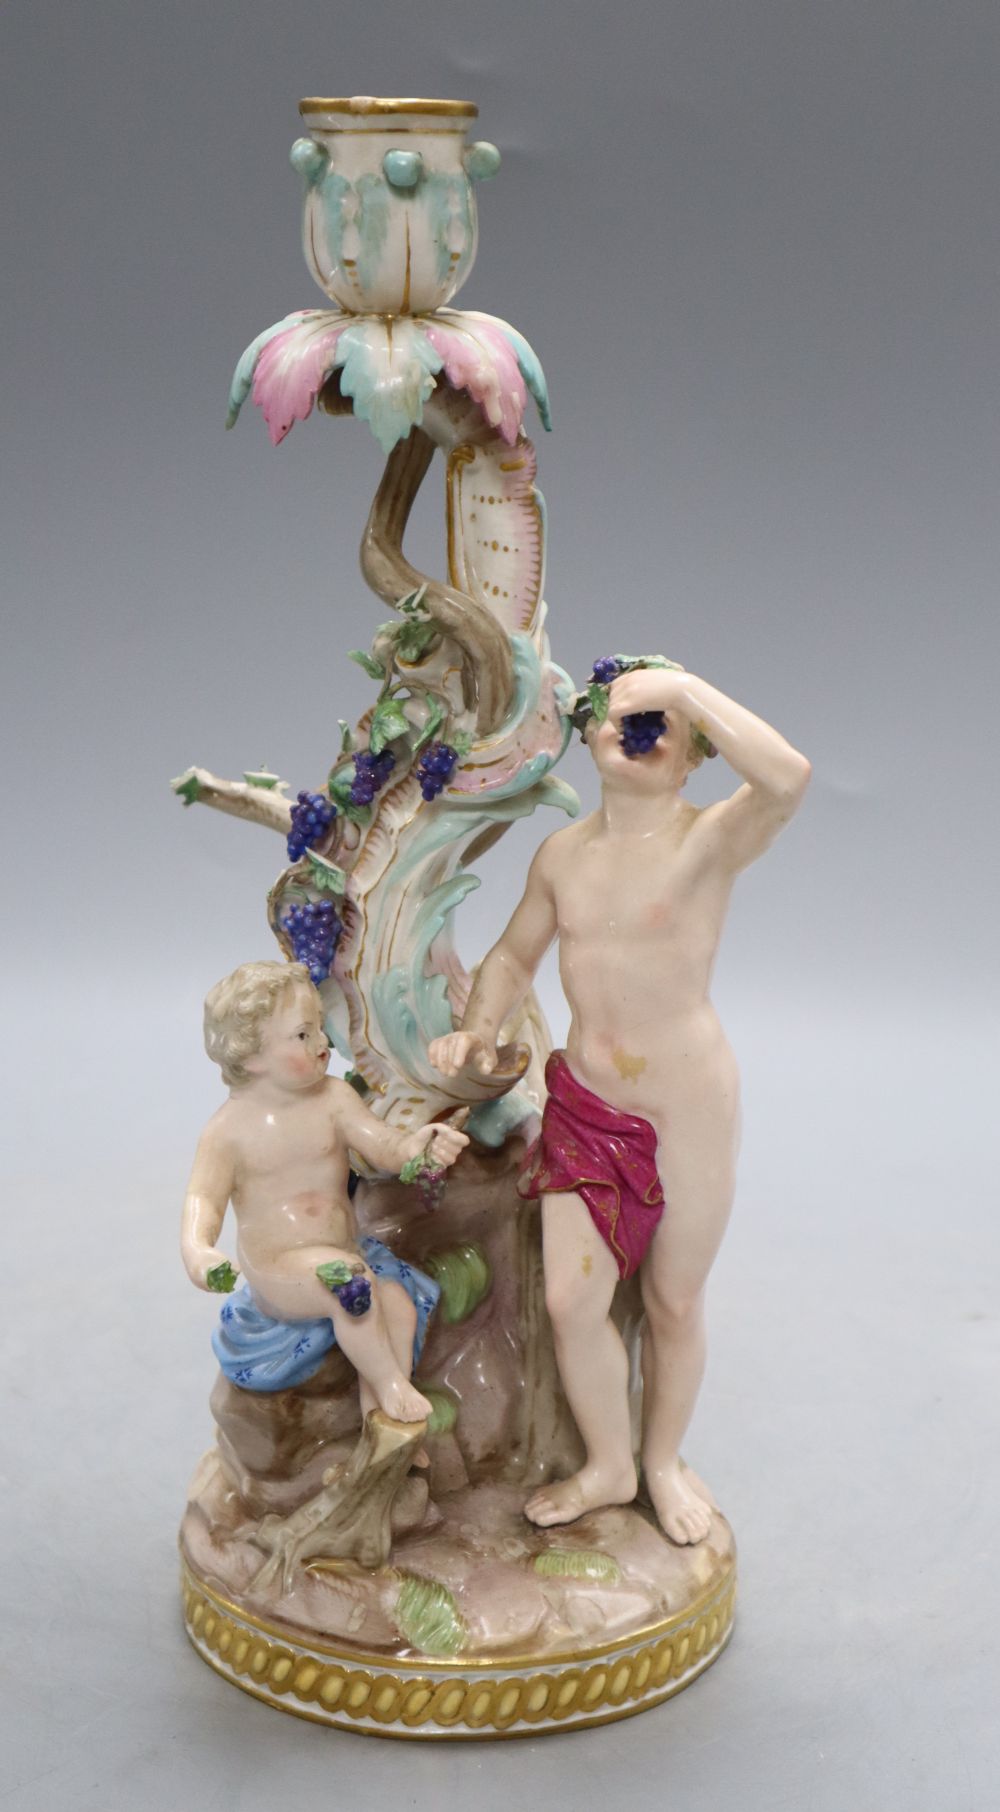 A Meissen 'Bacchus and cherub' candelabrum, 19th century, model no 1190, H. 29cmCONDITION: The